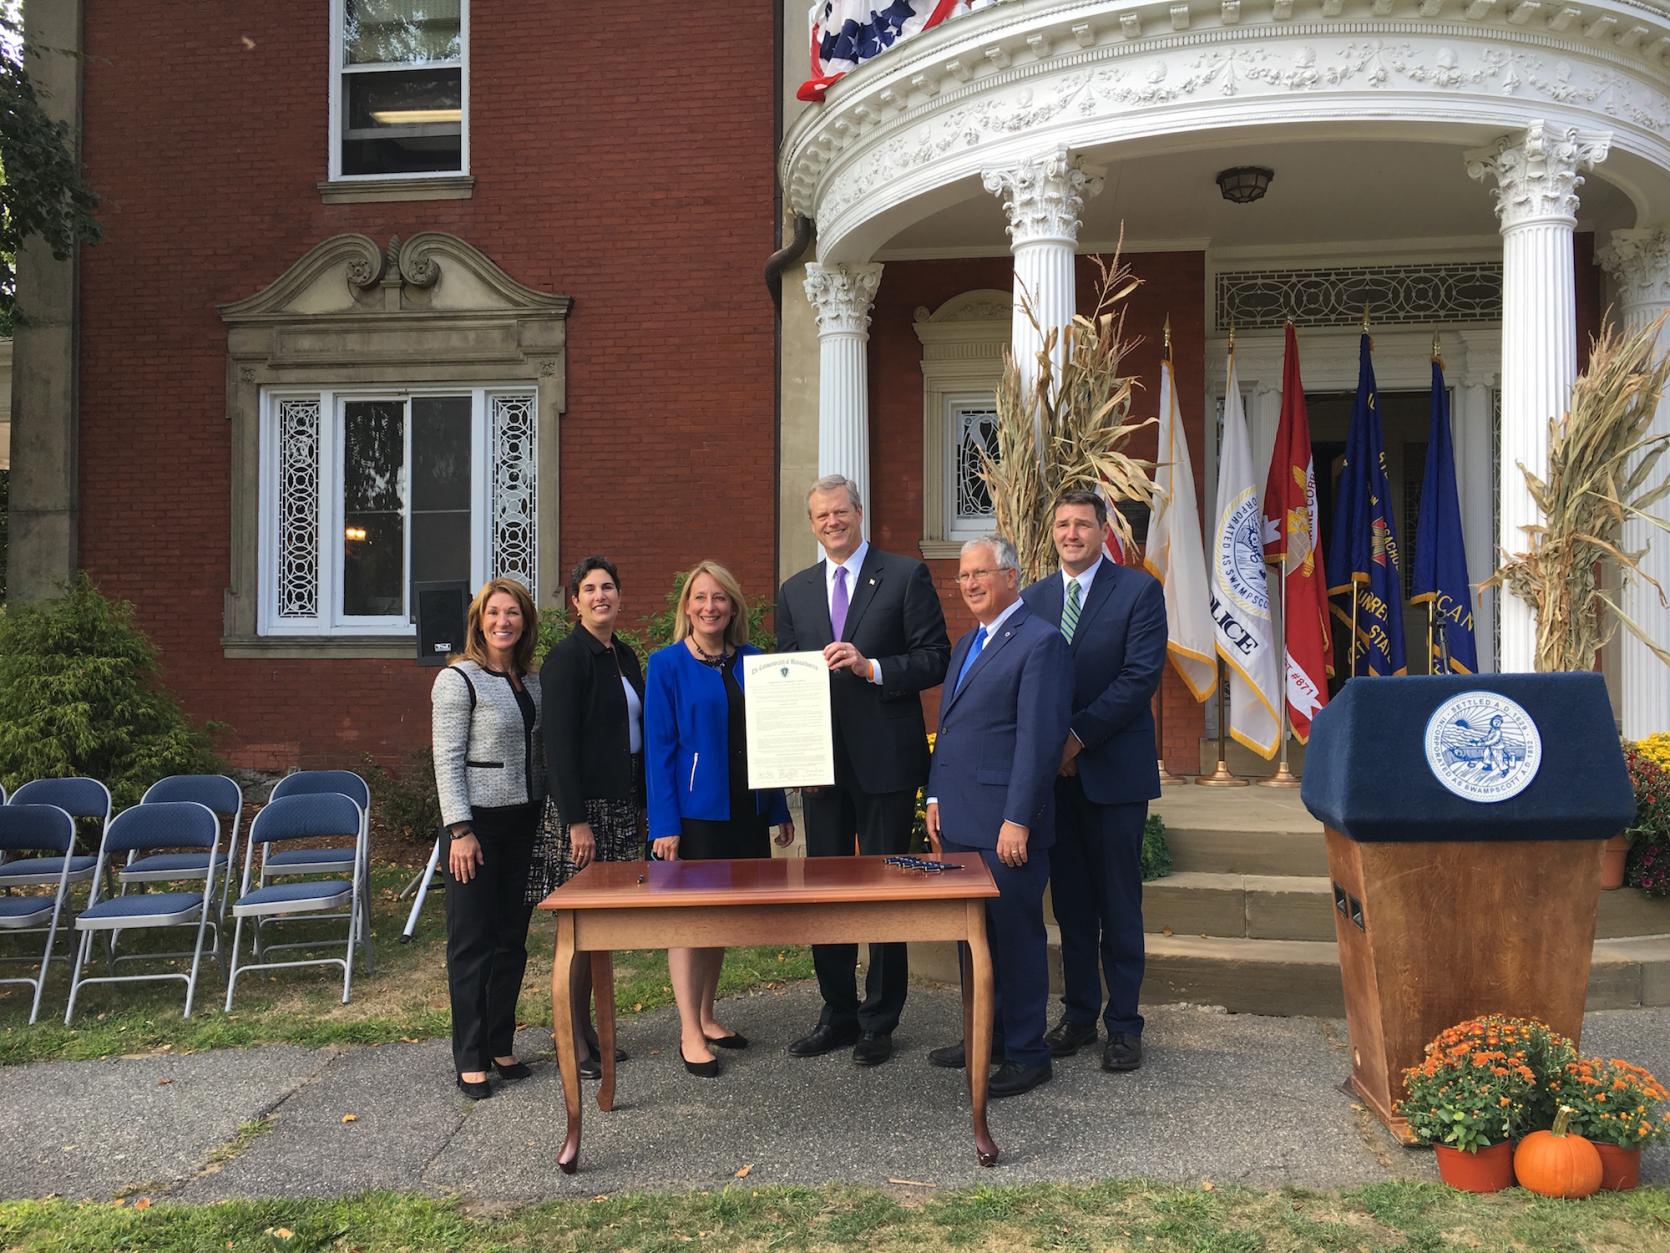 Governor Baker and Lt. Governor Polito with local legislators and officials after signing the 300th Community Compact.